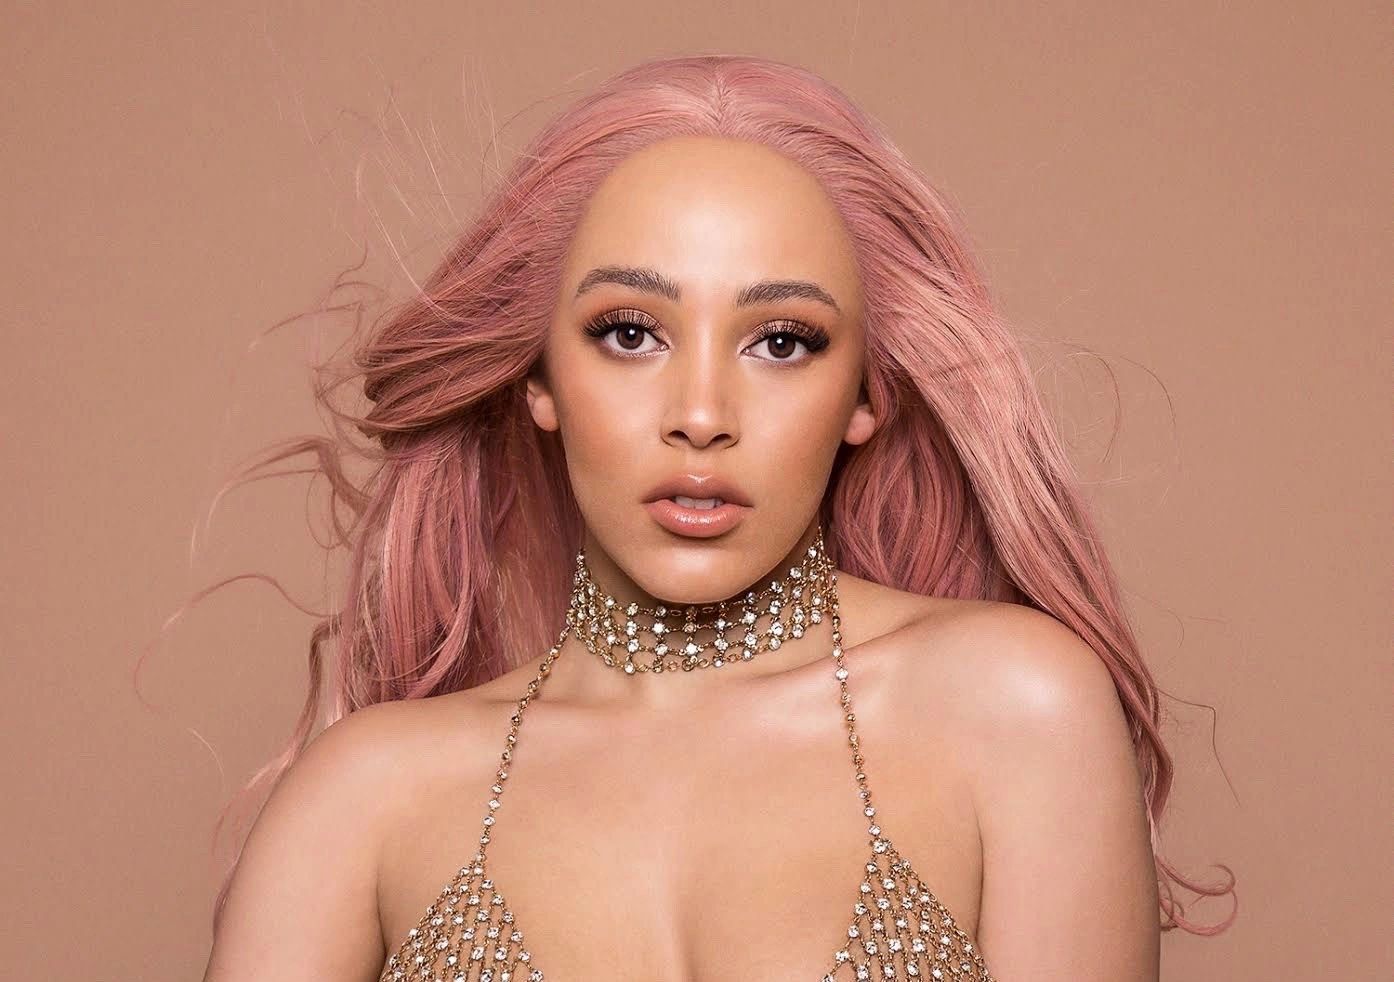 Doja Cat in Racist TinyChat Rooms, Twitter Wants Her Canceled! 